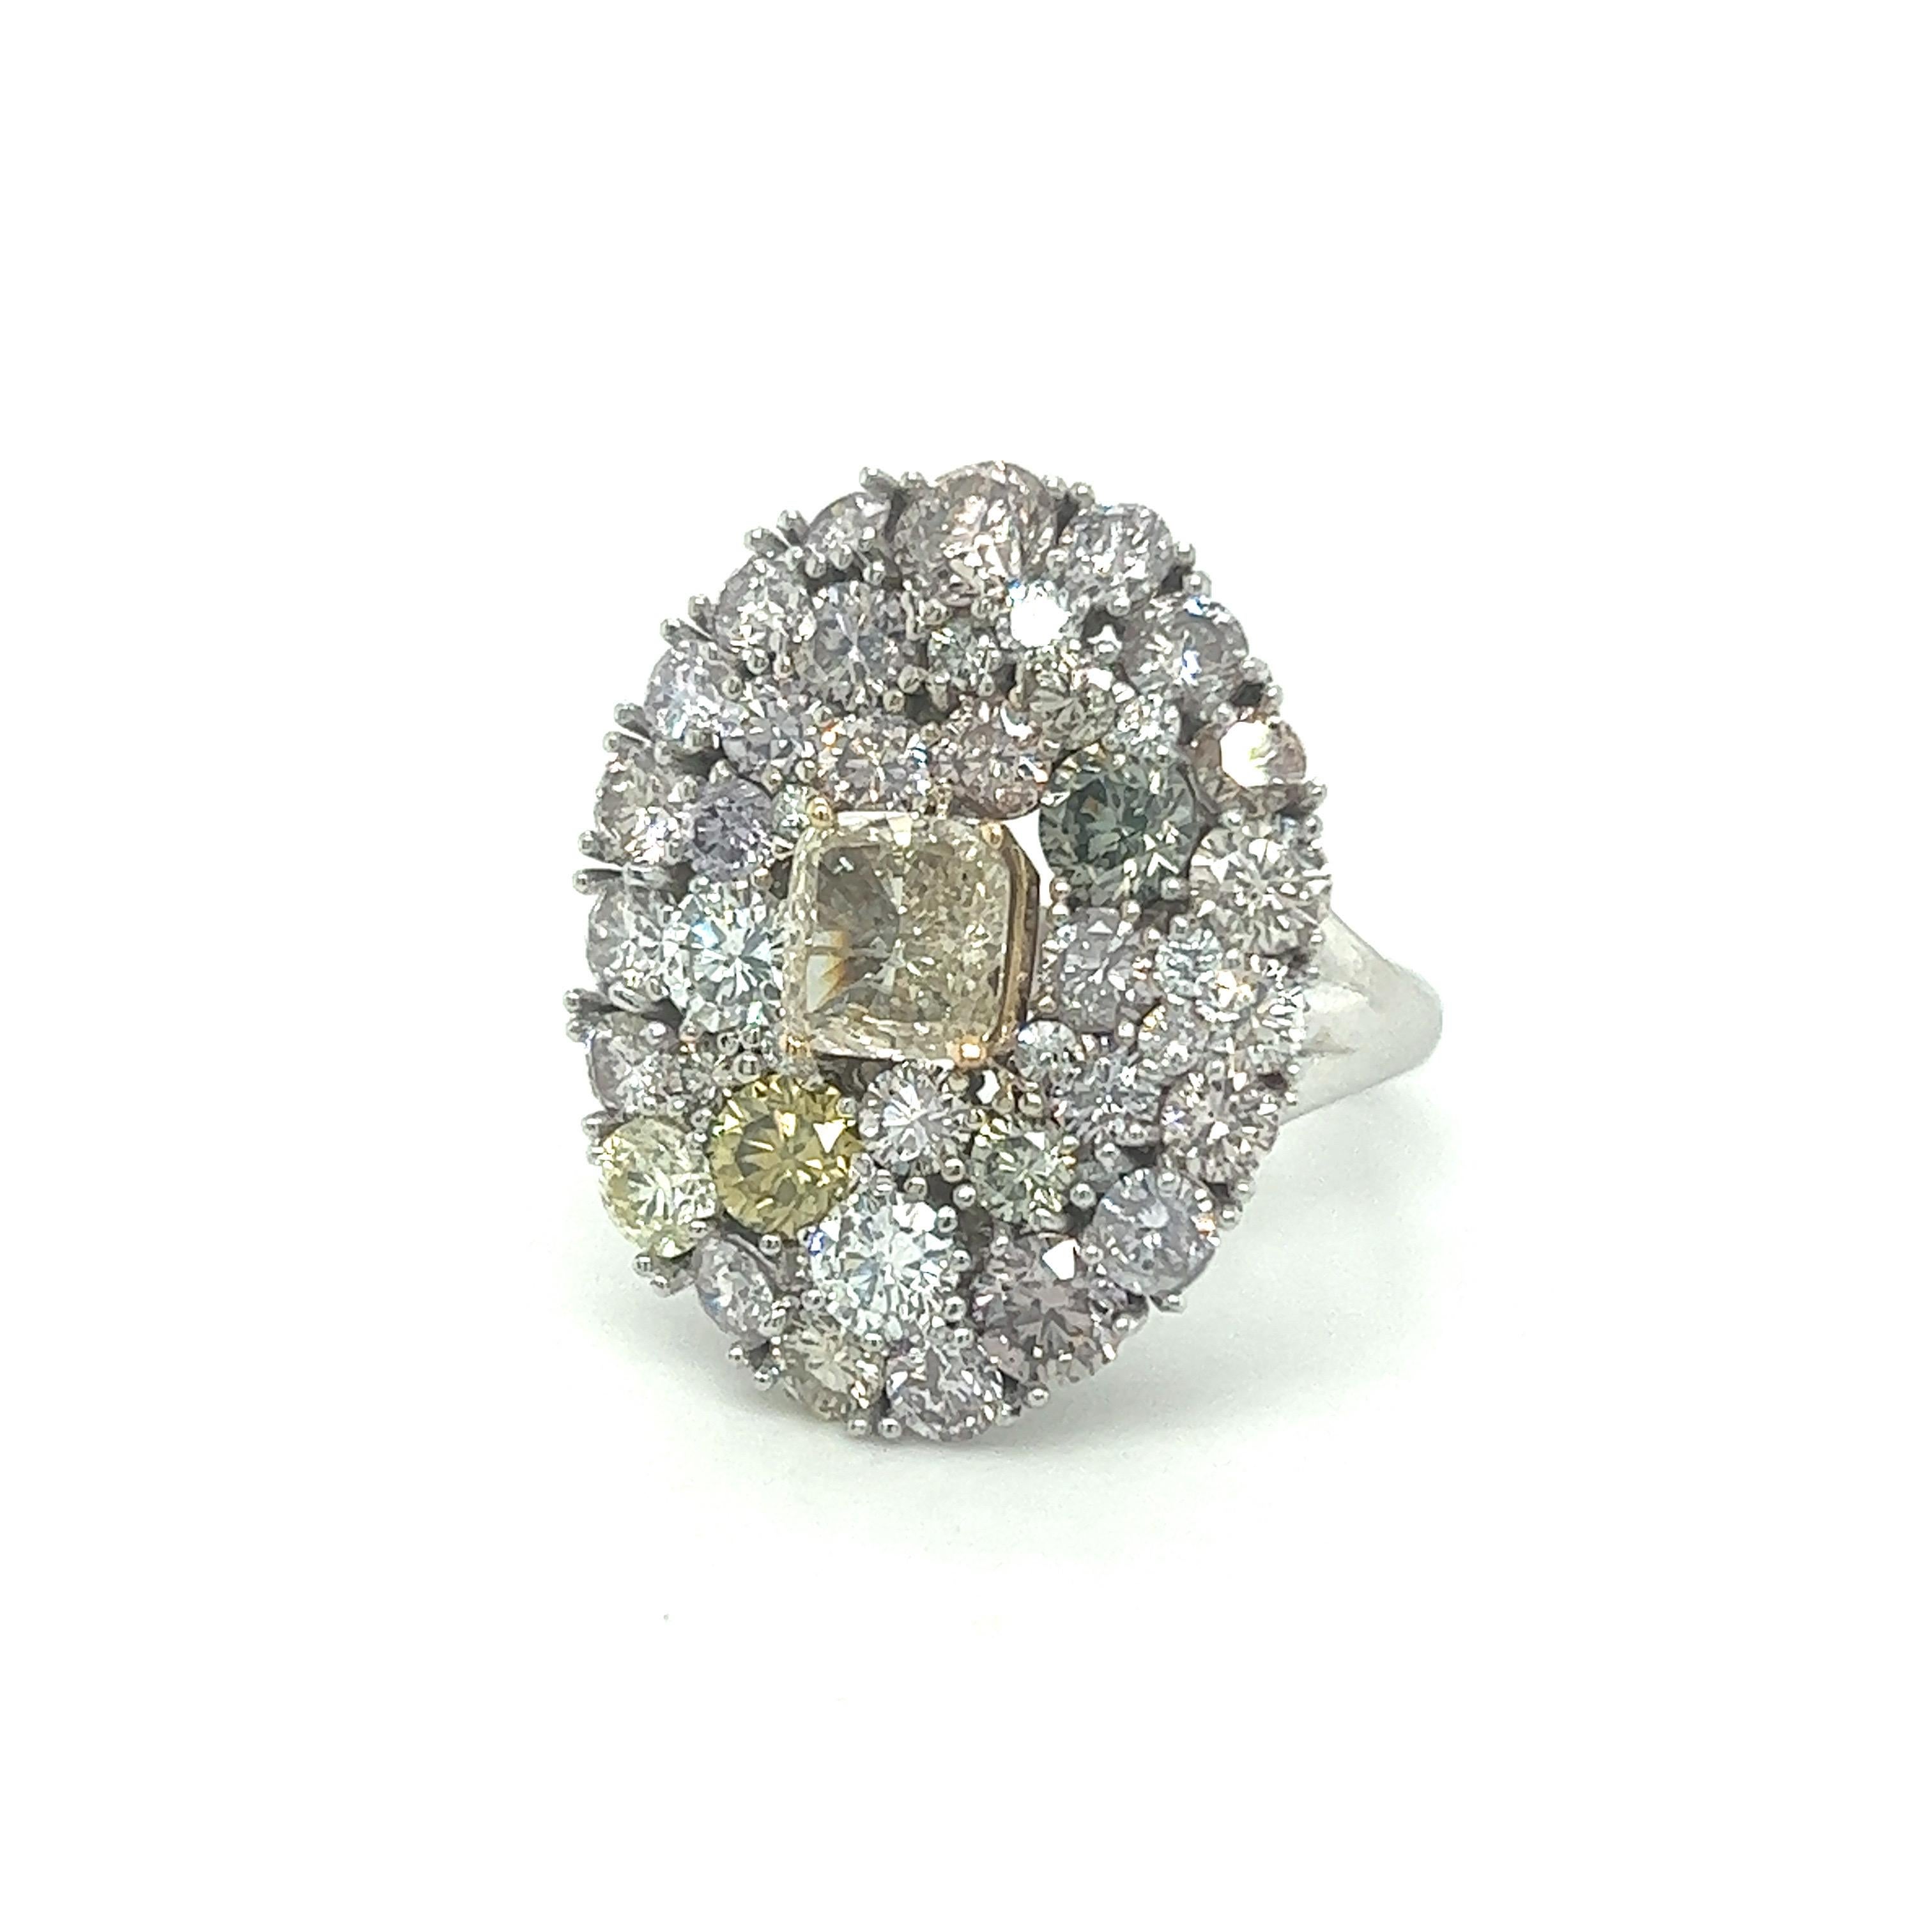 Natural Multi Colored 5 Carat Round and Princess Cut Diamond Ring For Sale 10